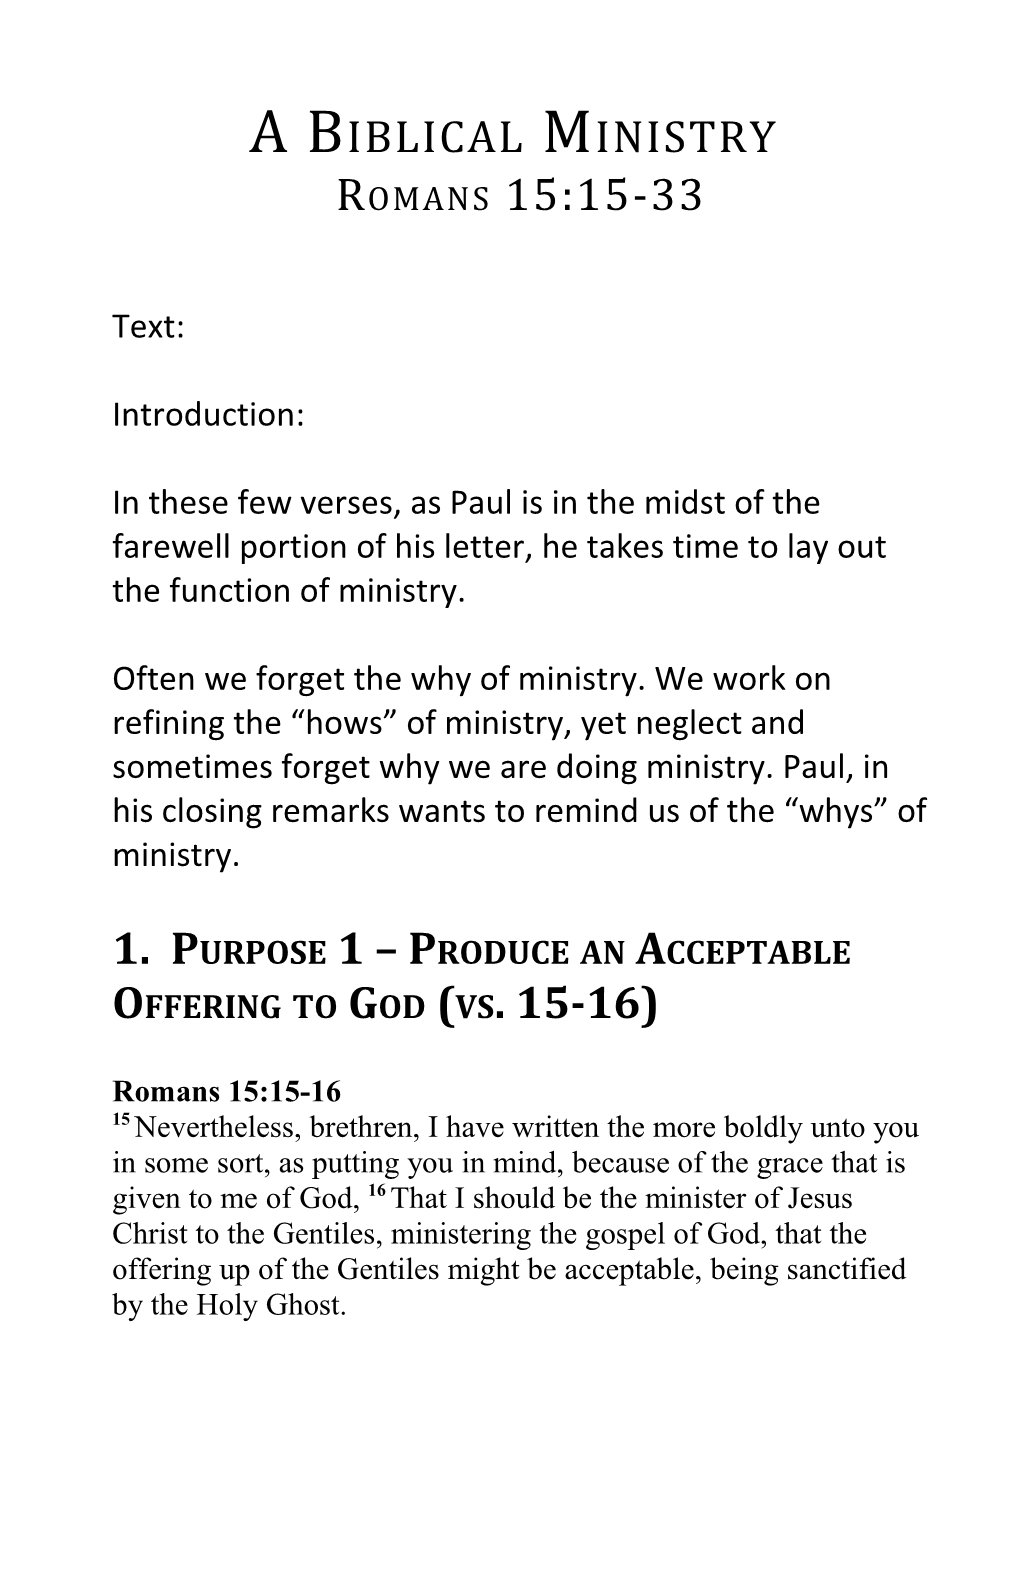 1. Purpose 1 Produce an Acceptable Offering to God (Vs. 15-16)